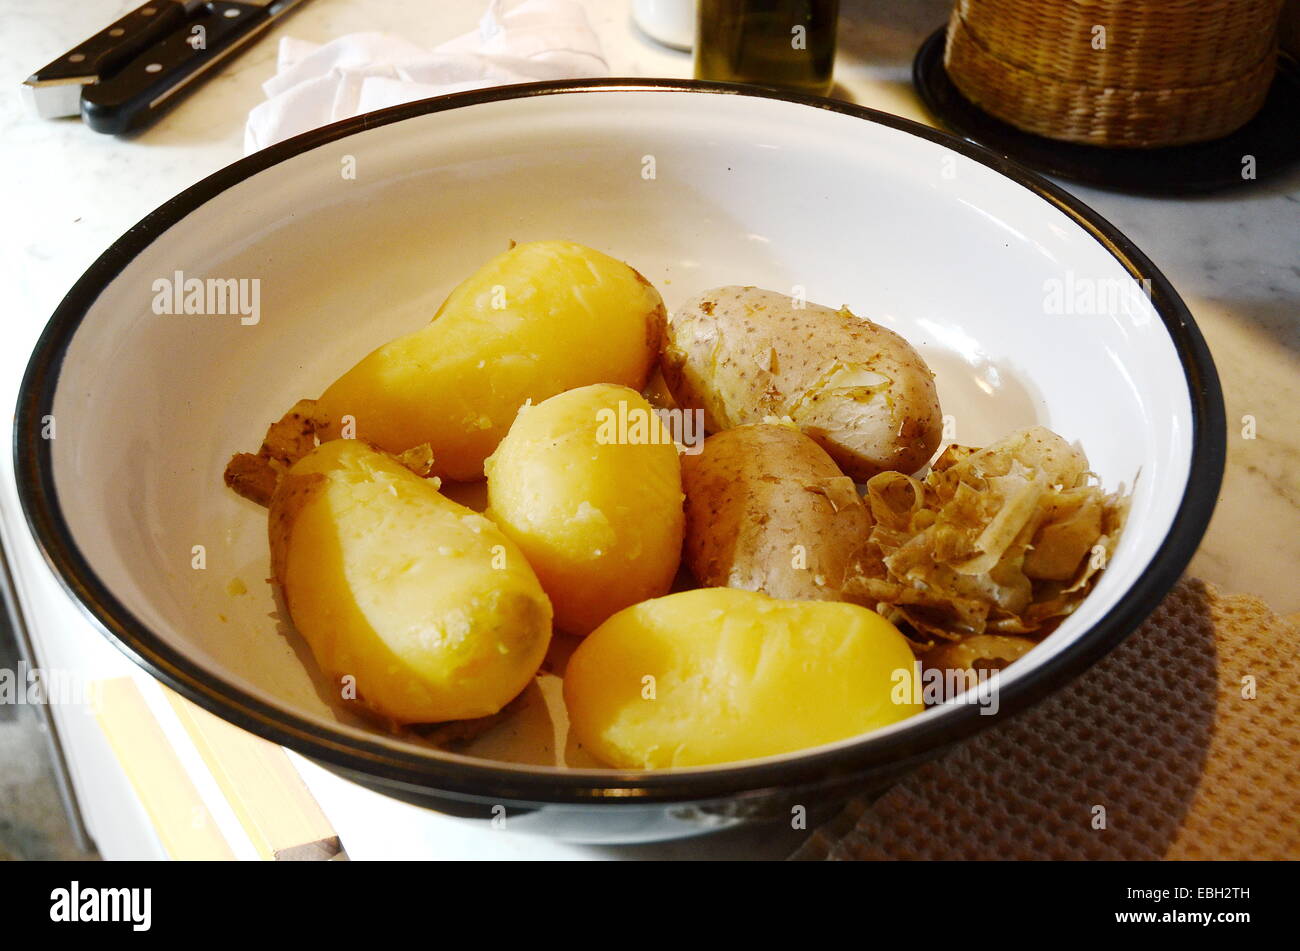 Whole boiled potatoes in a plate Stock Photo